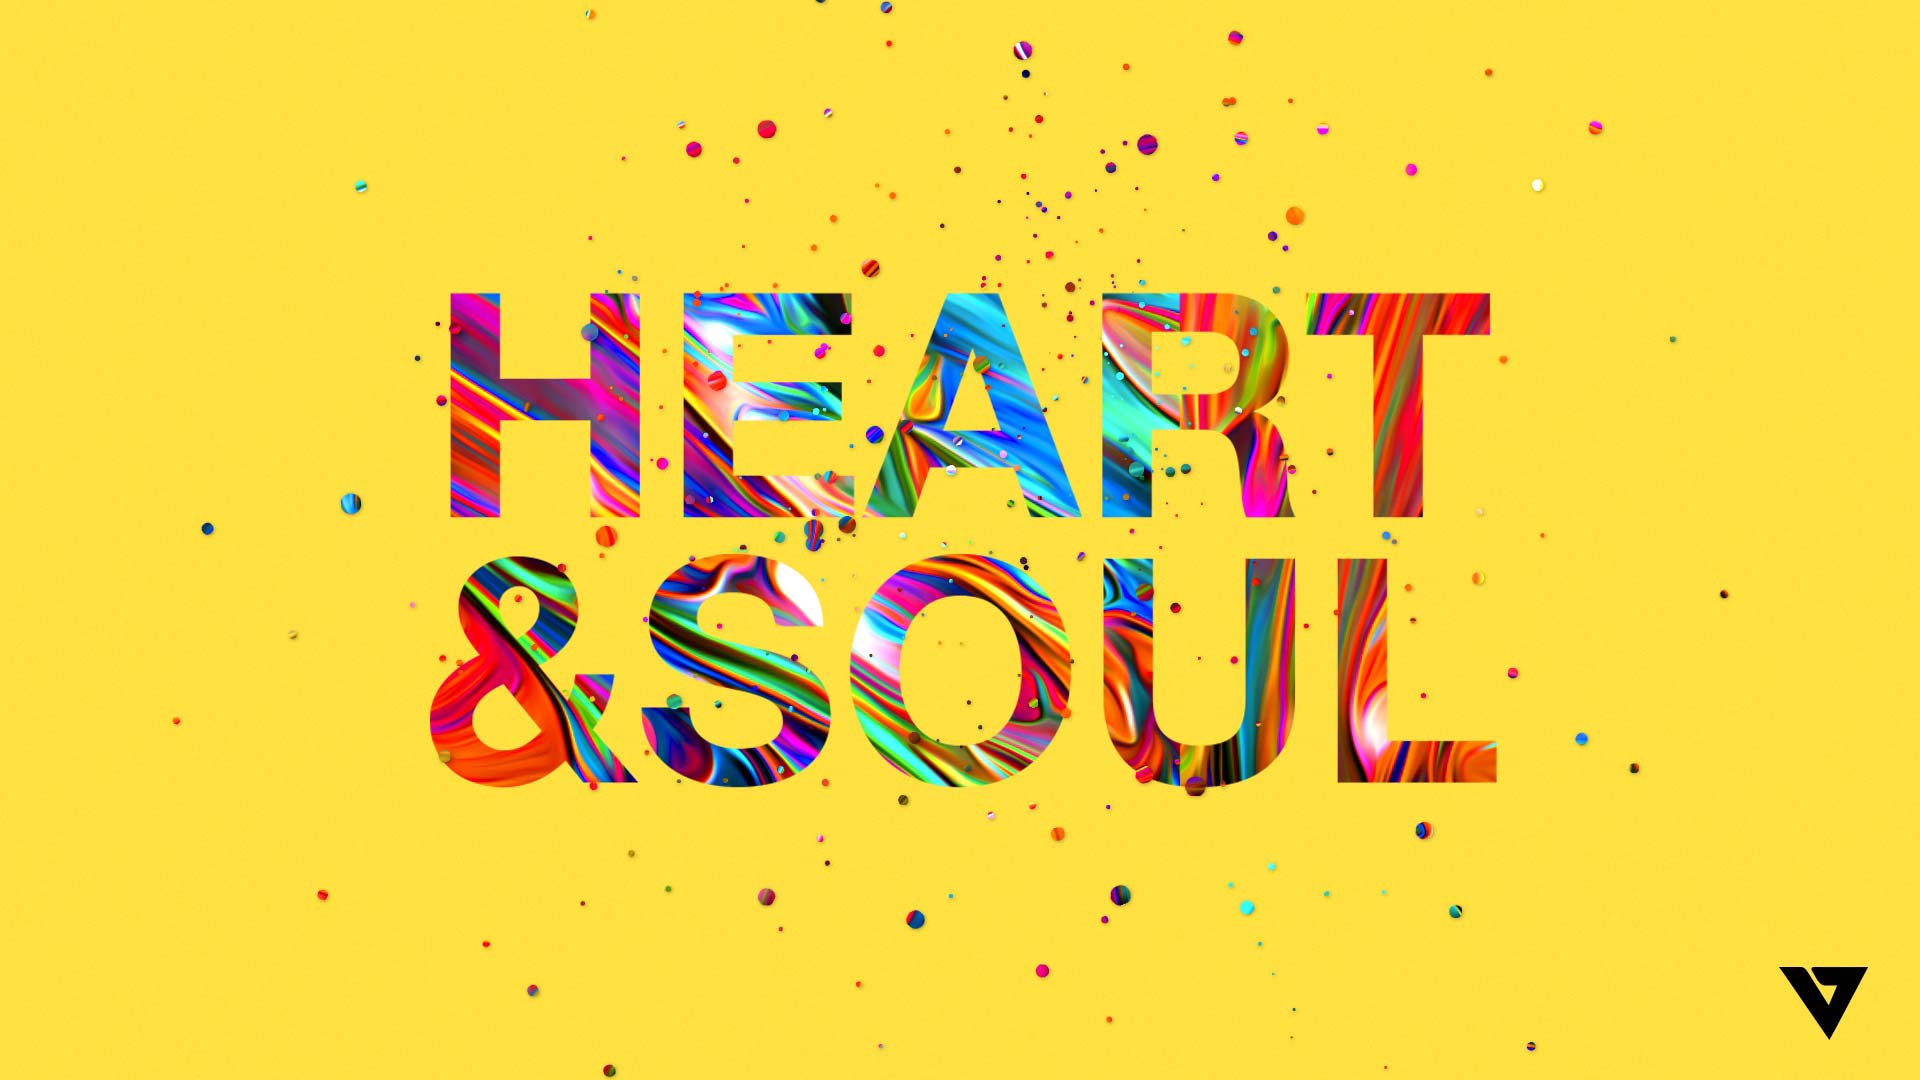 Message "Heart & Soul Part 4" from Mike Stephens Vibrant Church